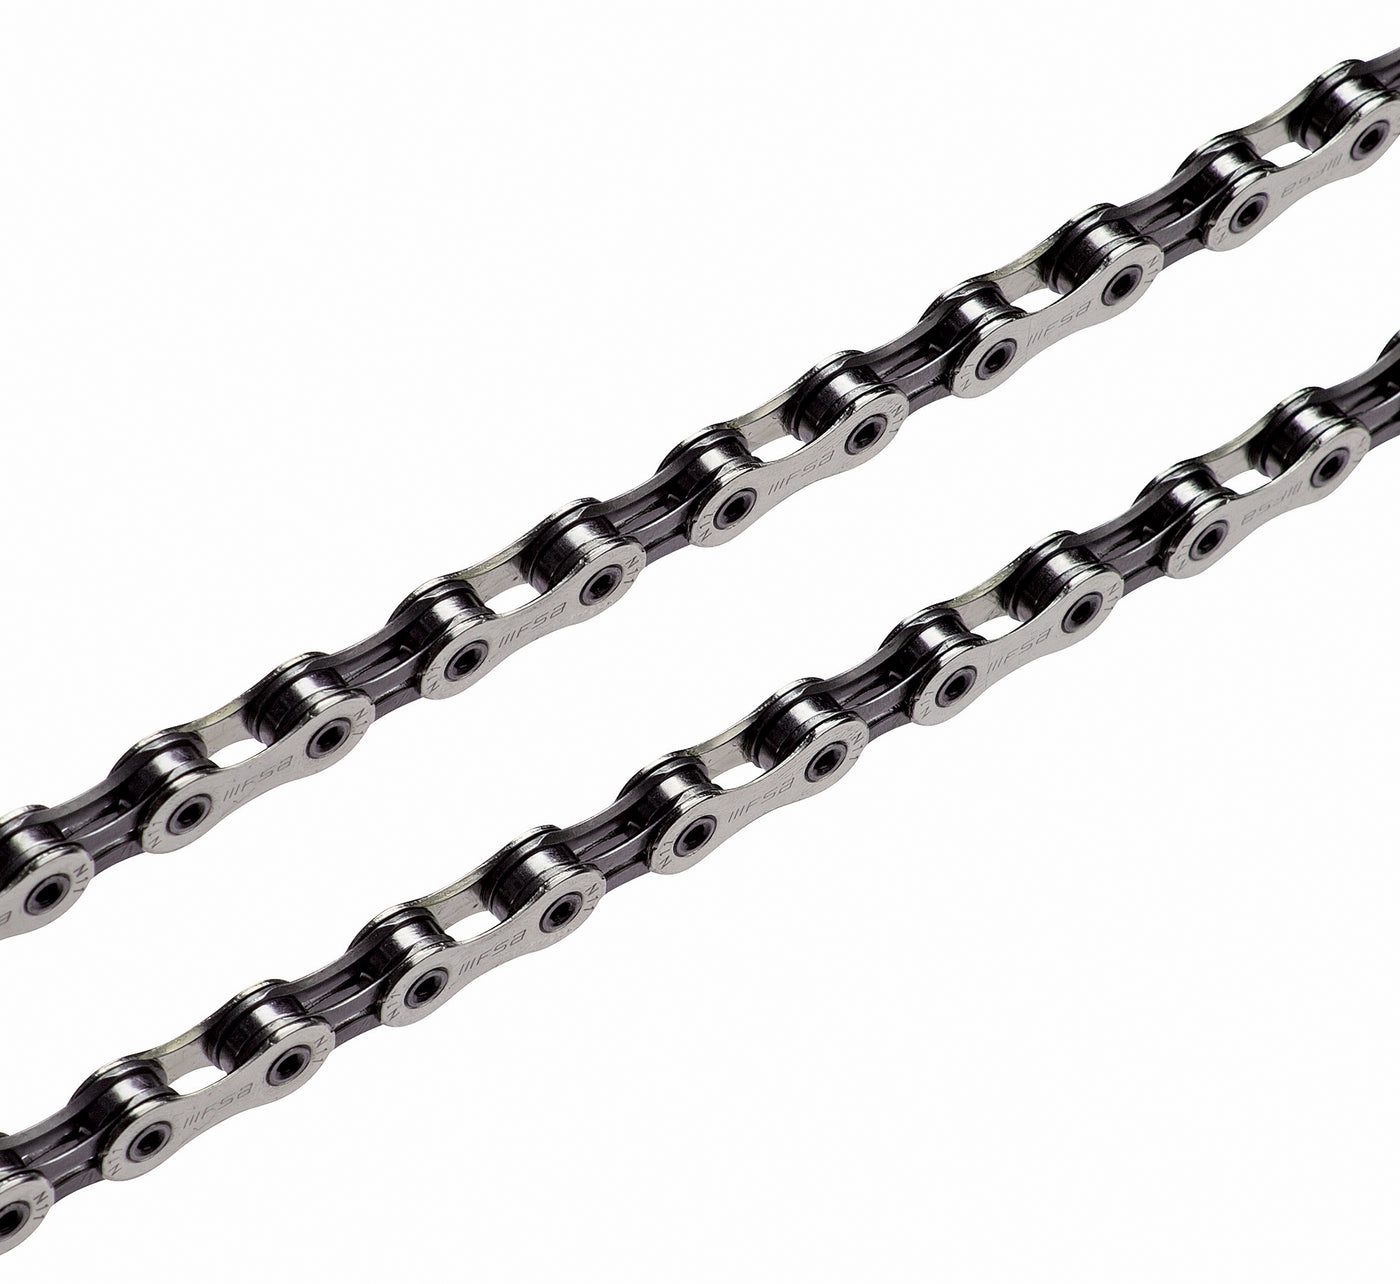 Team Issue 11sp Chain Pro